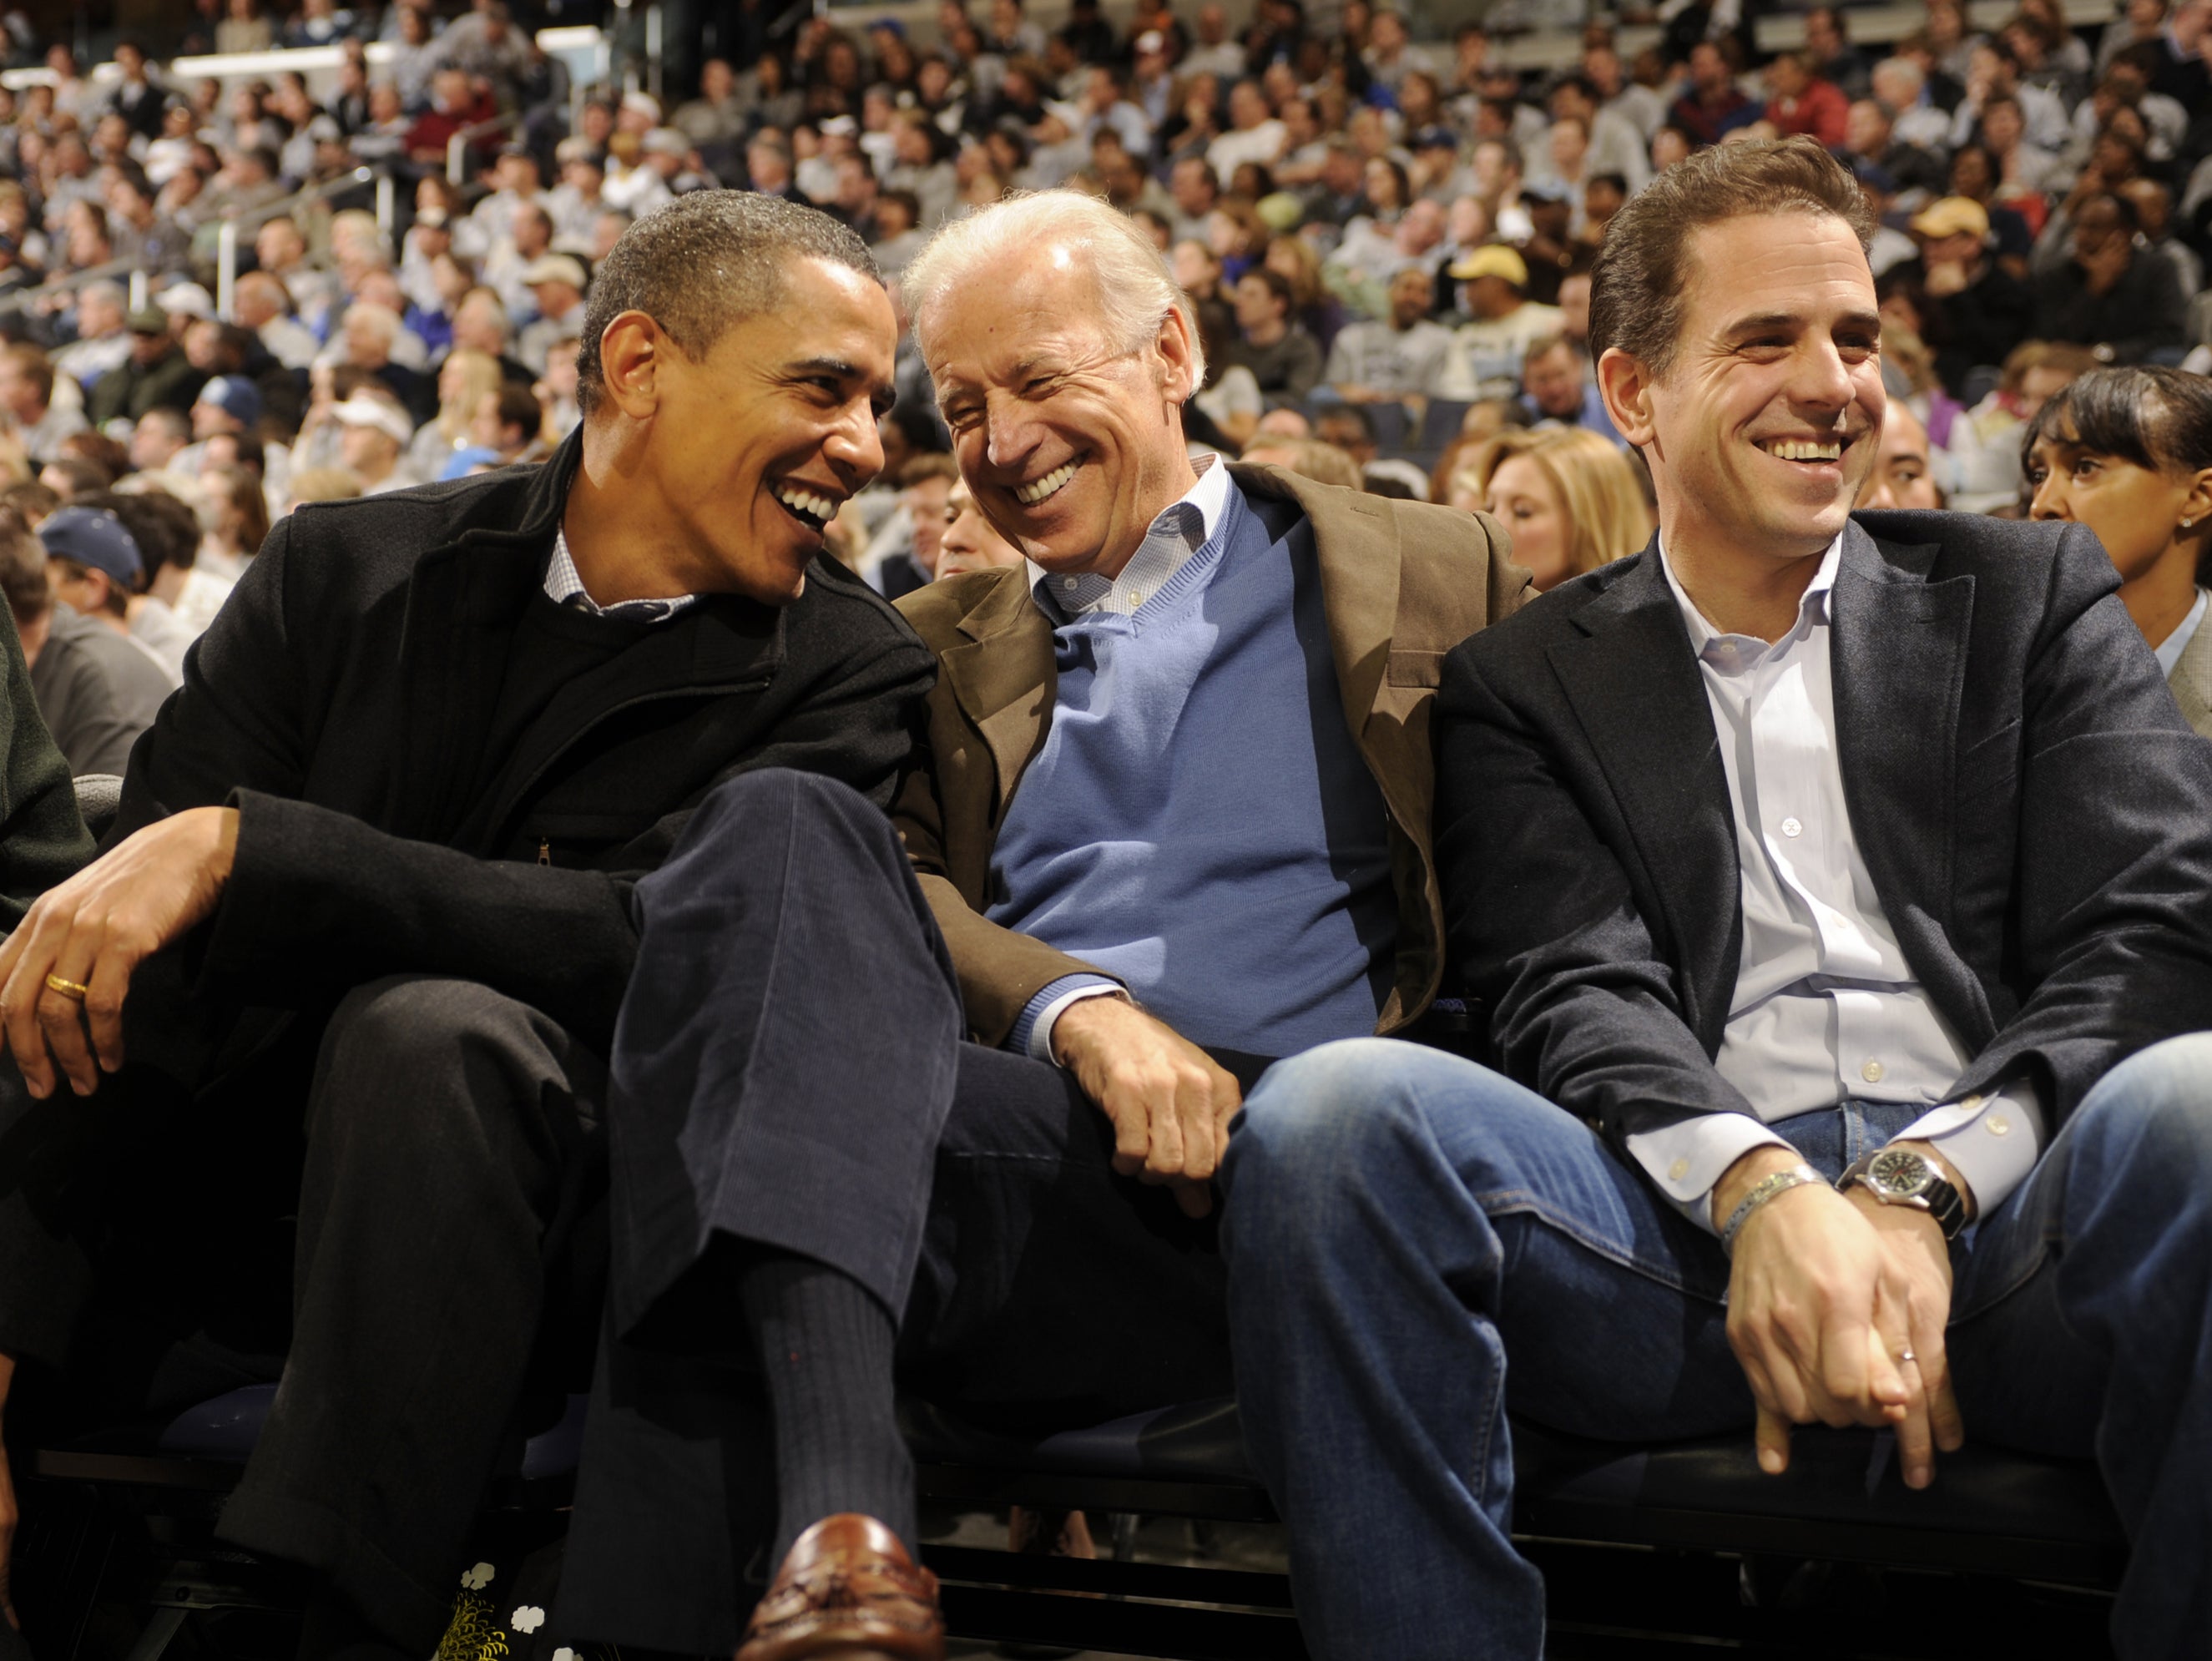 Joe Biden, pictured with Barack Obama and his son, Hunter, also denies the claims